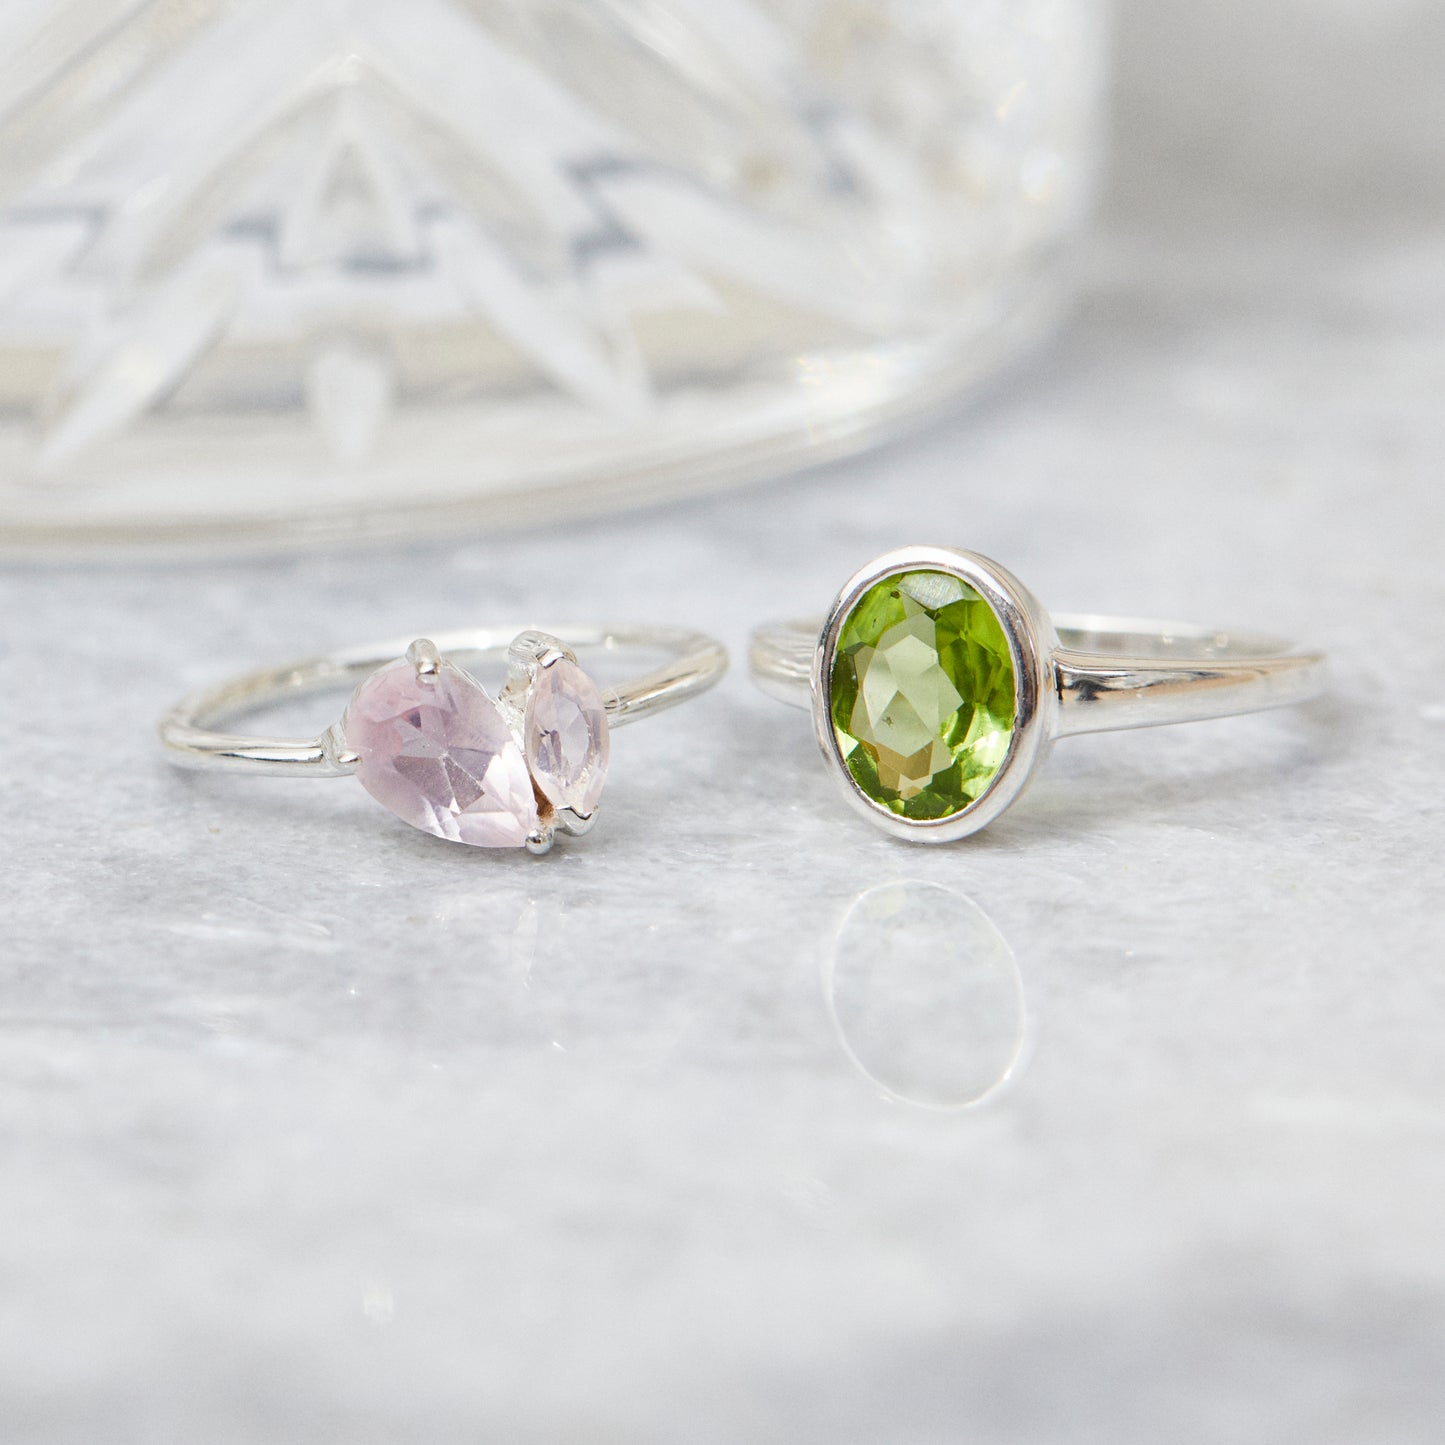 zoe sugg intentions courage peridot ring in silver